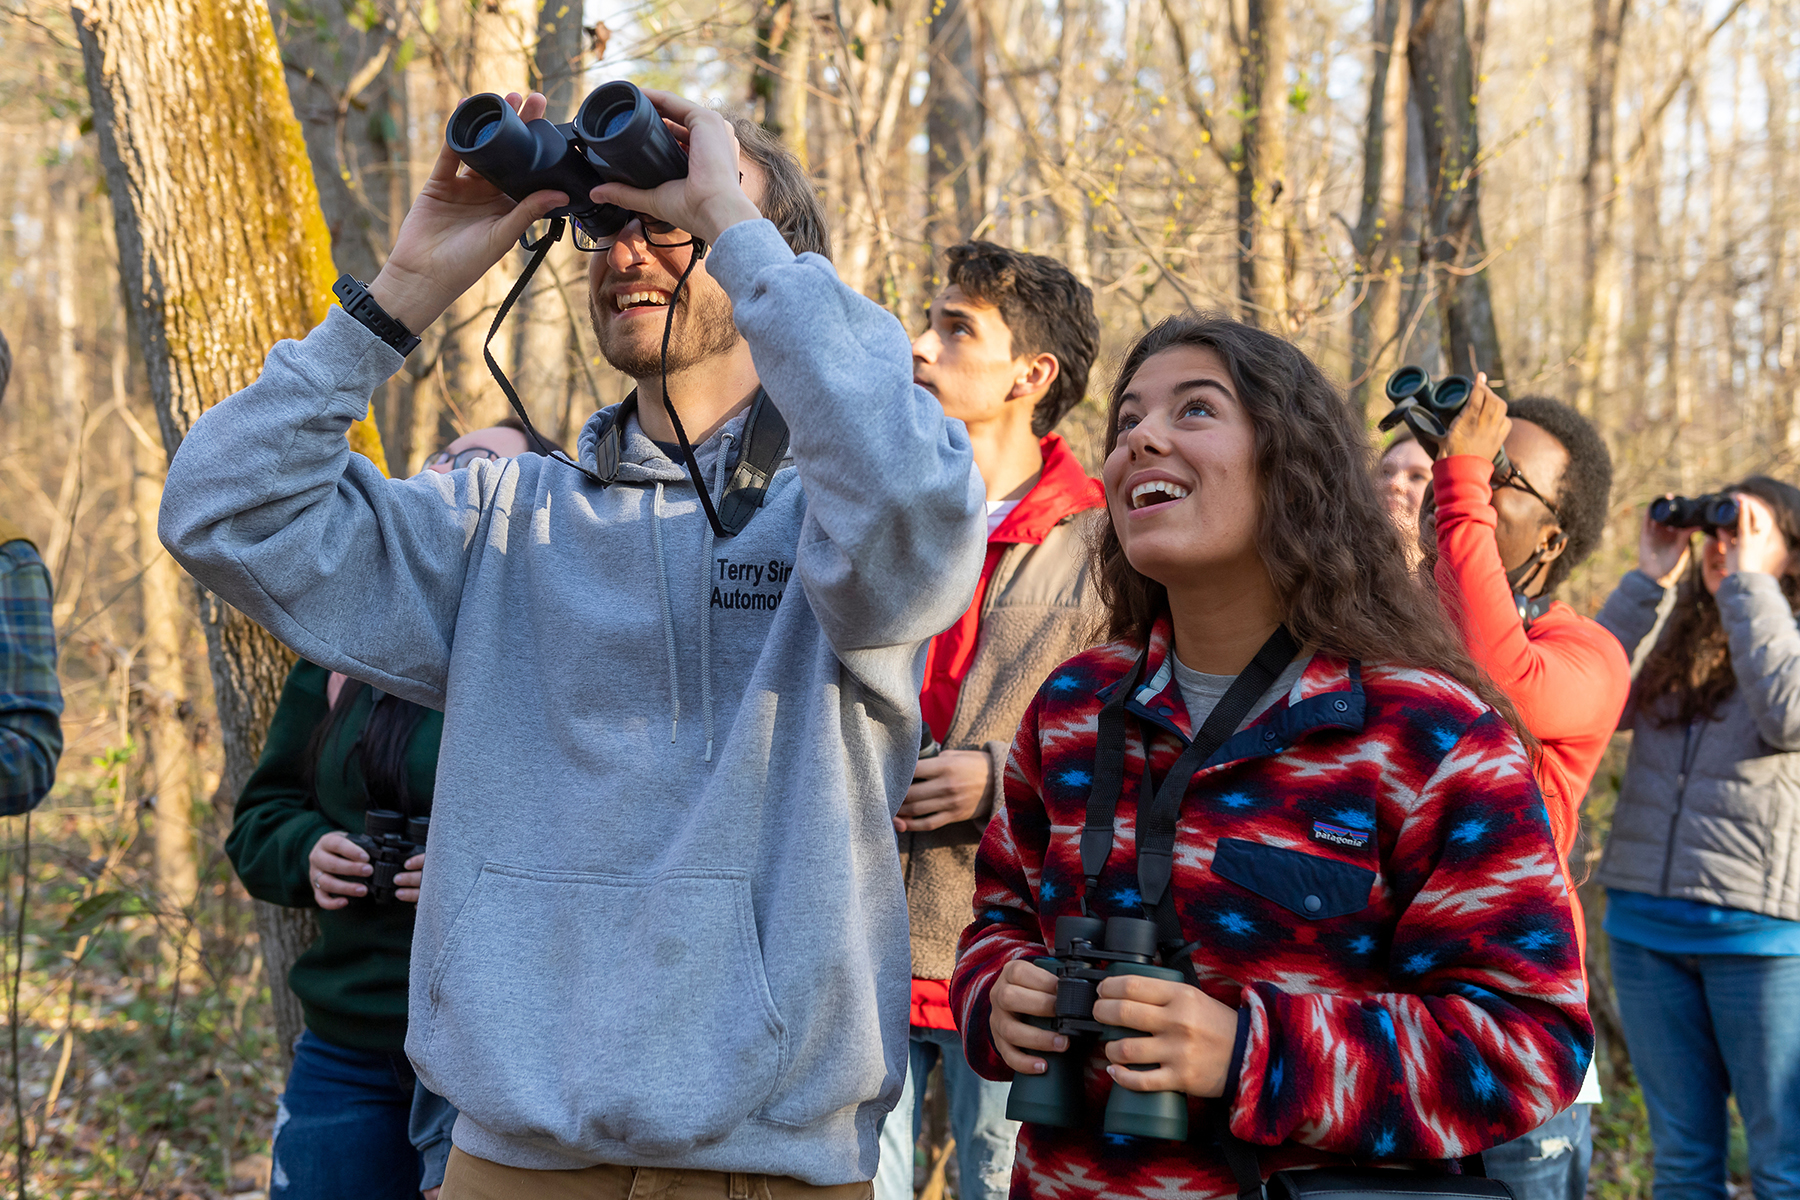 Environment and Sustainability Student with binoculars in Preserve